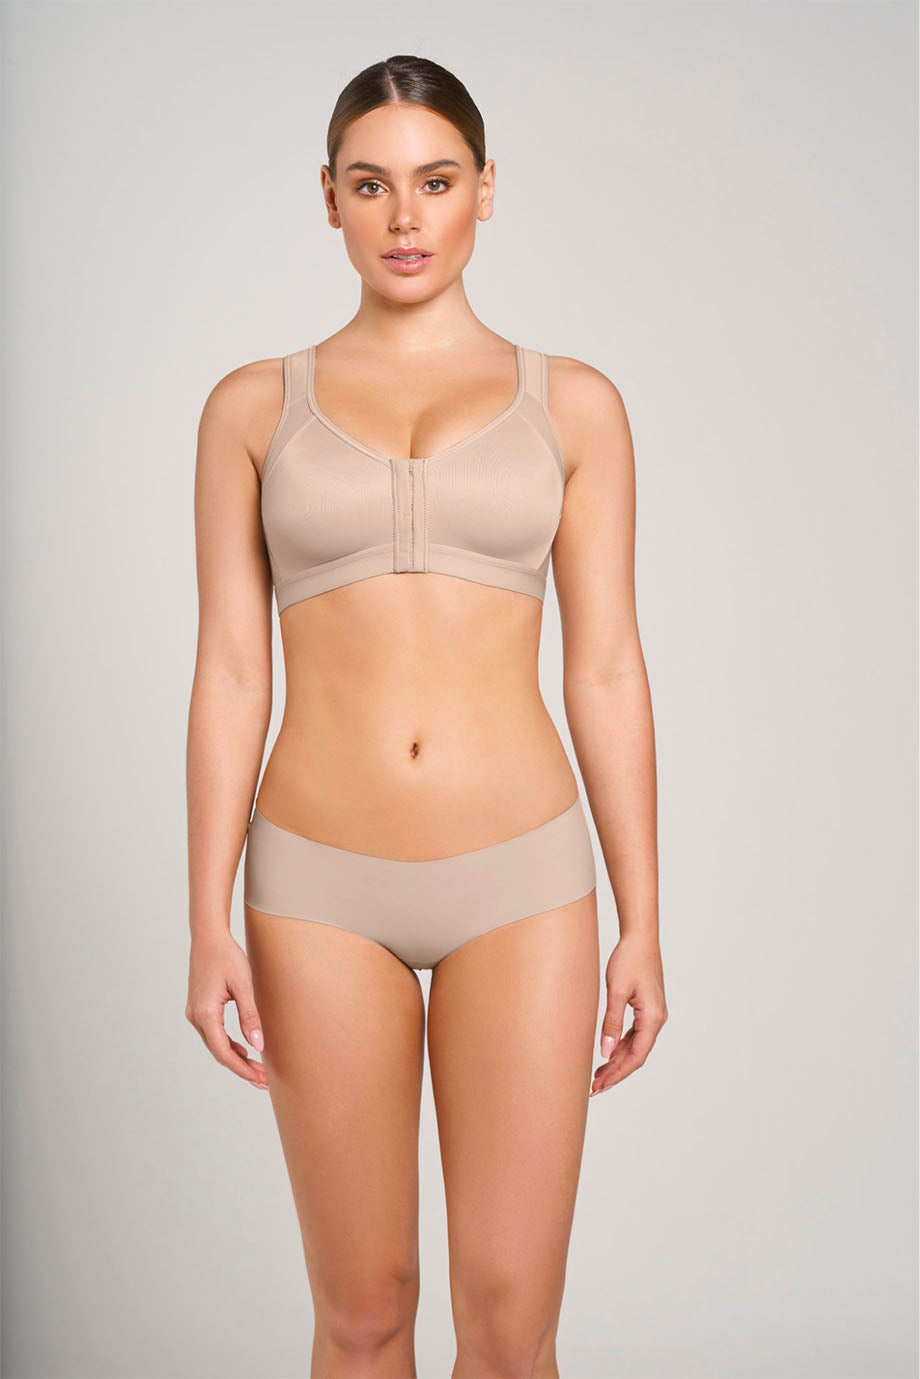 Padded Bras, For All Breast Surgeries and Reconstructions